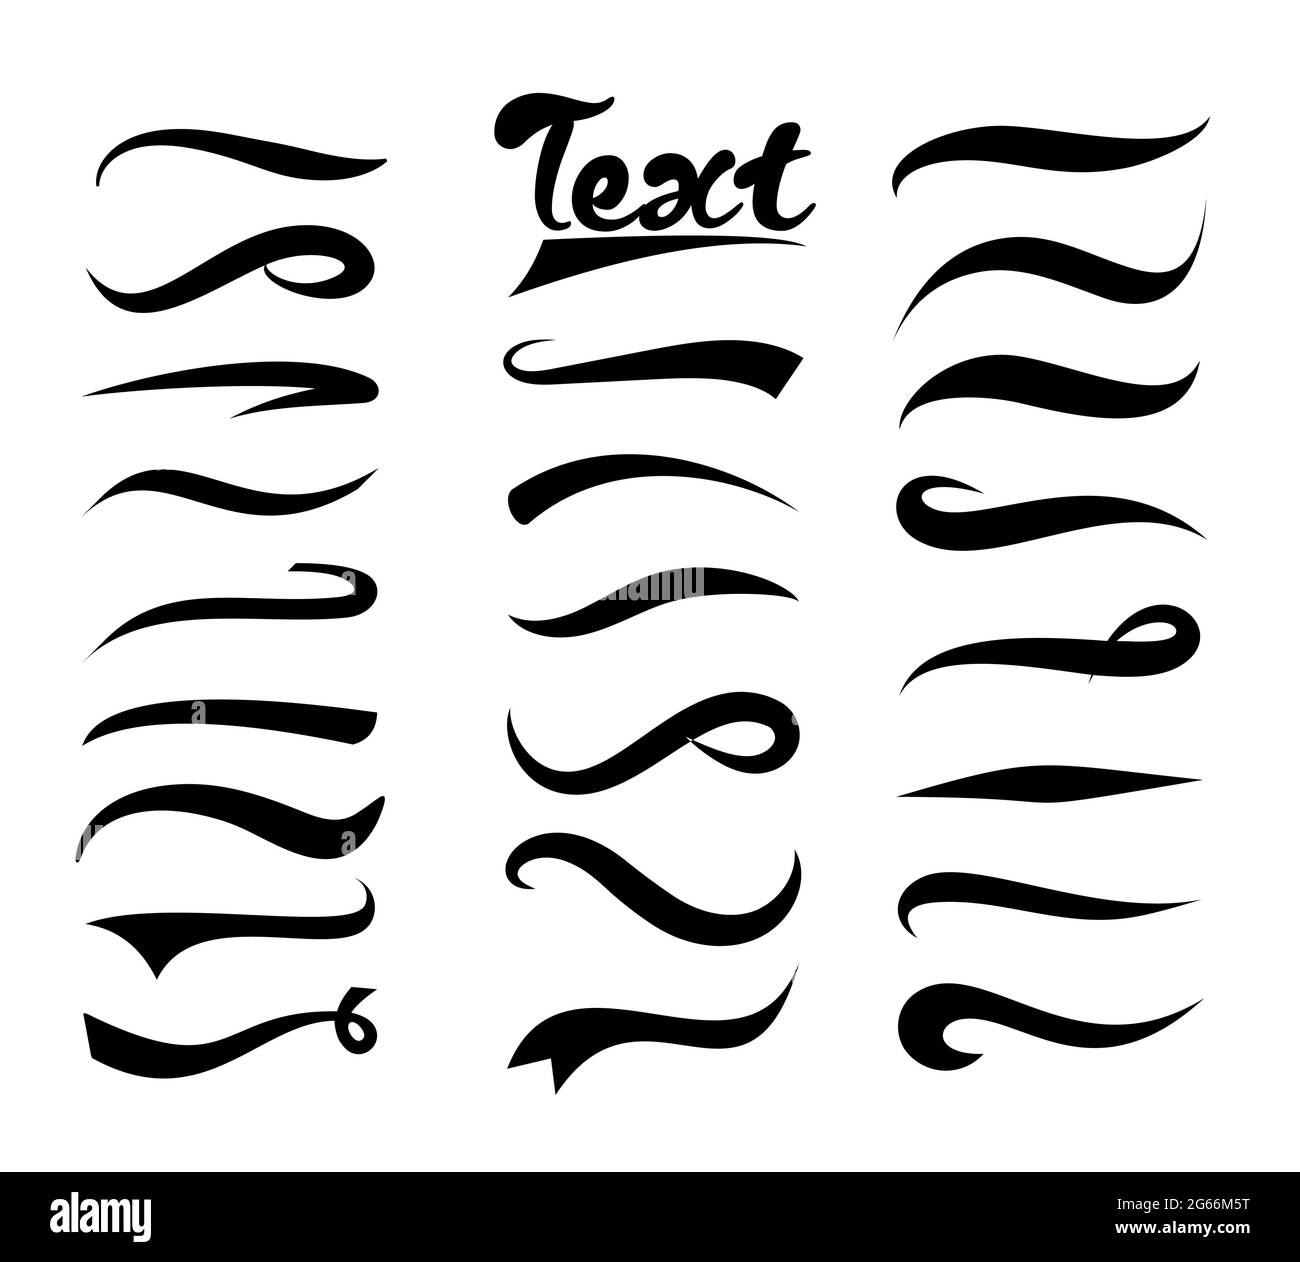 Retro texting tails. Swooshes swishes, swooshes and swashes for